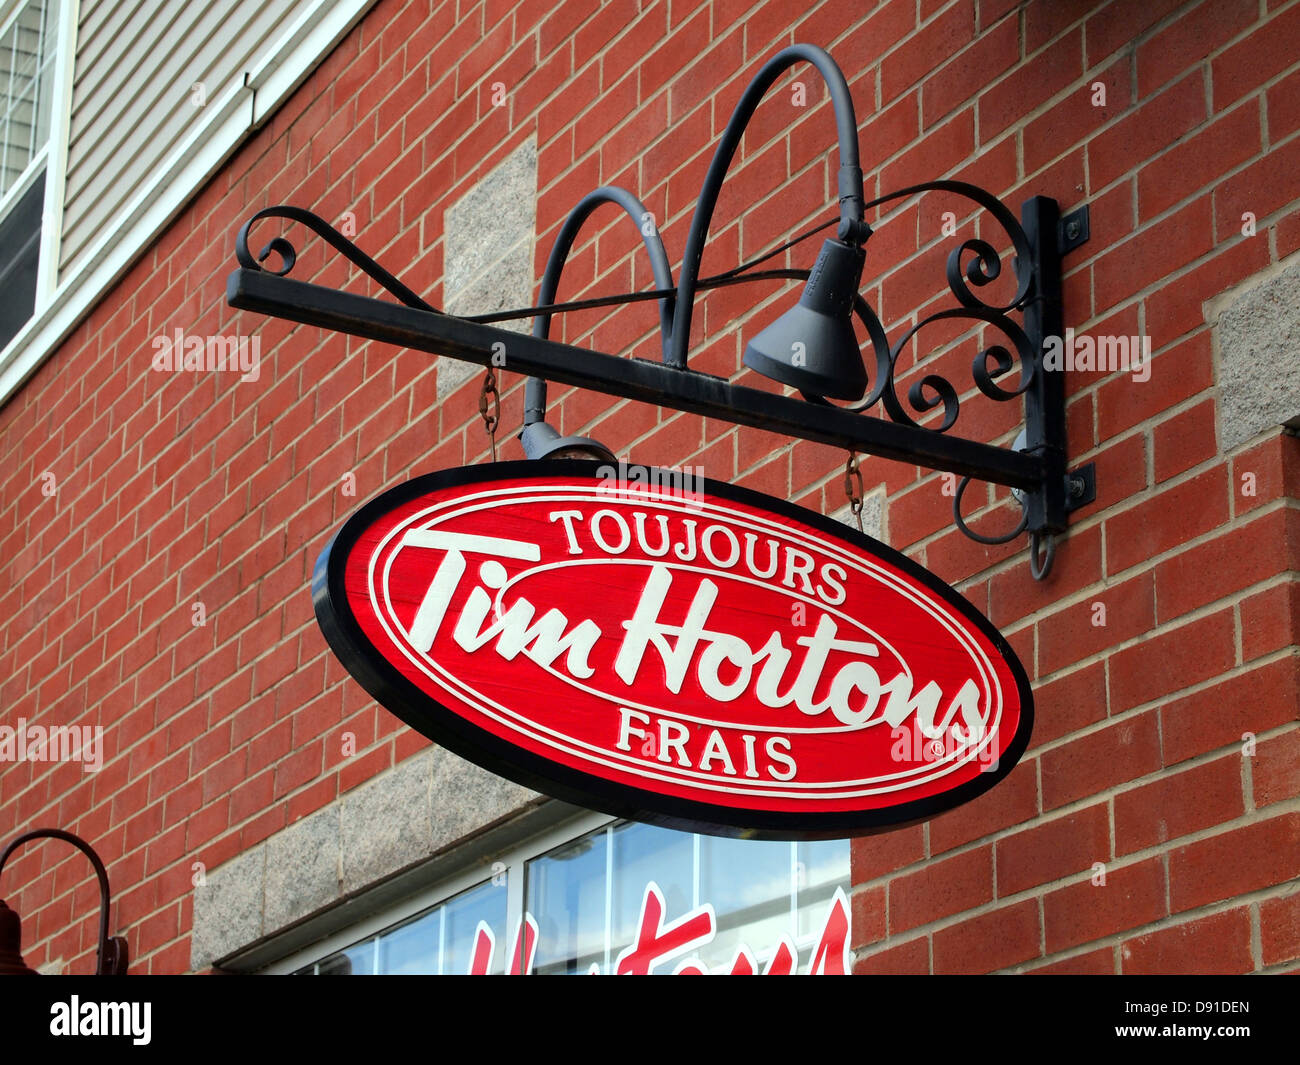 Tim Hortons coffee and donut shop sign, Canada Stock Photo